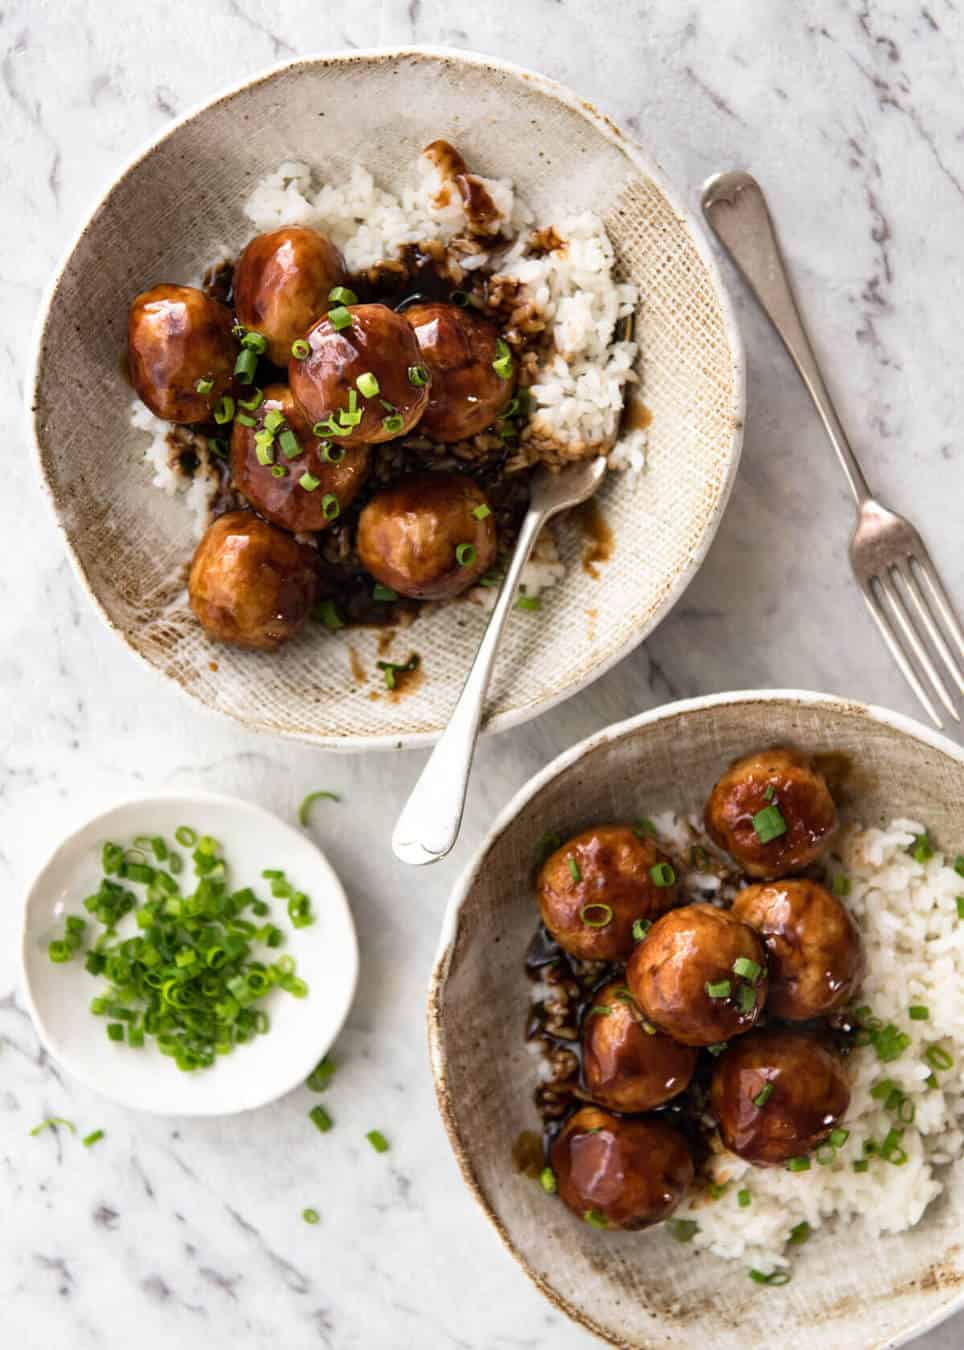 If you love juicy, plump chicken meatballs and Teriyaki sauce, you will go mad over these Teriyaki Chicken Meatballs! recipetineats.com